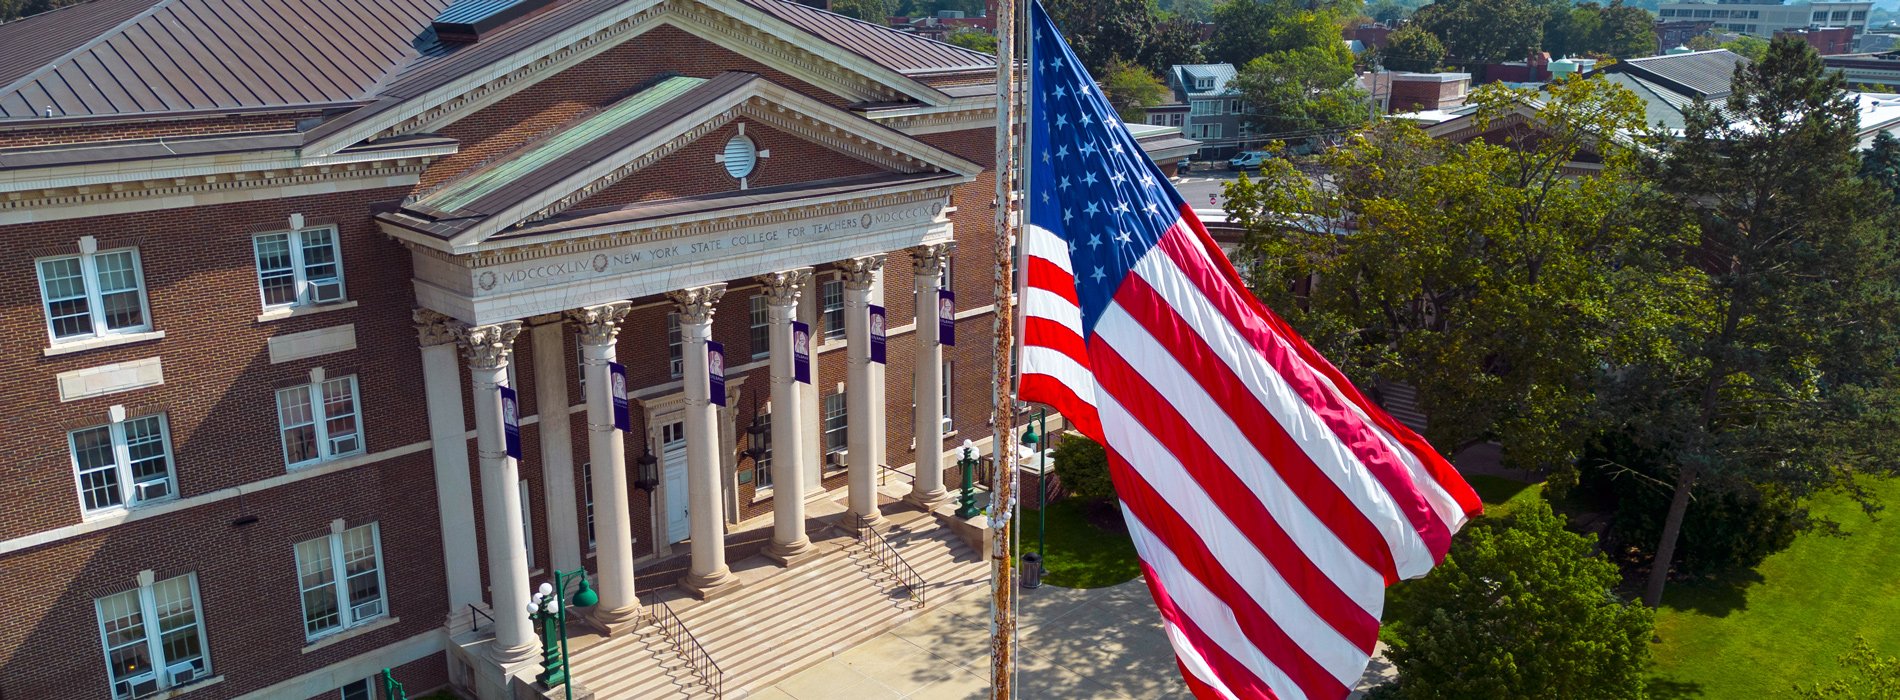 The United States flag flying over the UAlbany Downtown campus.